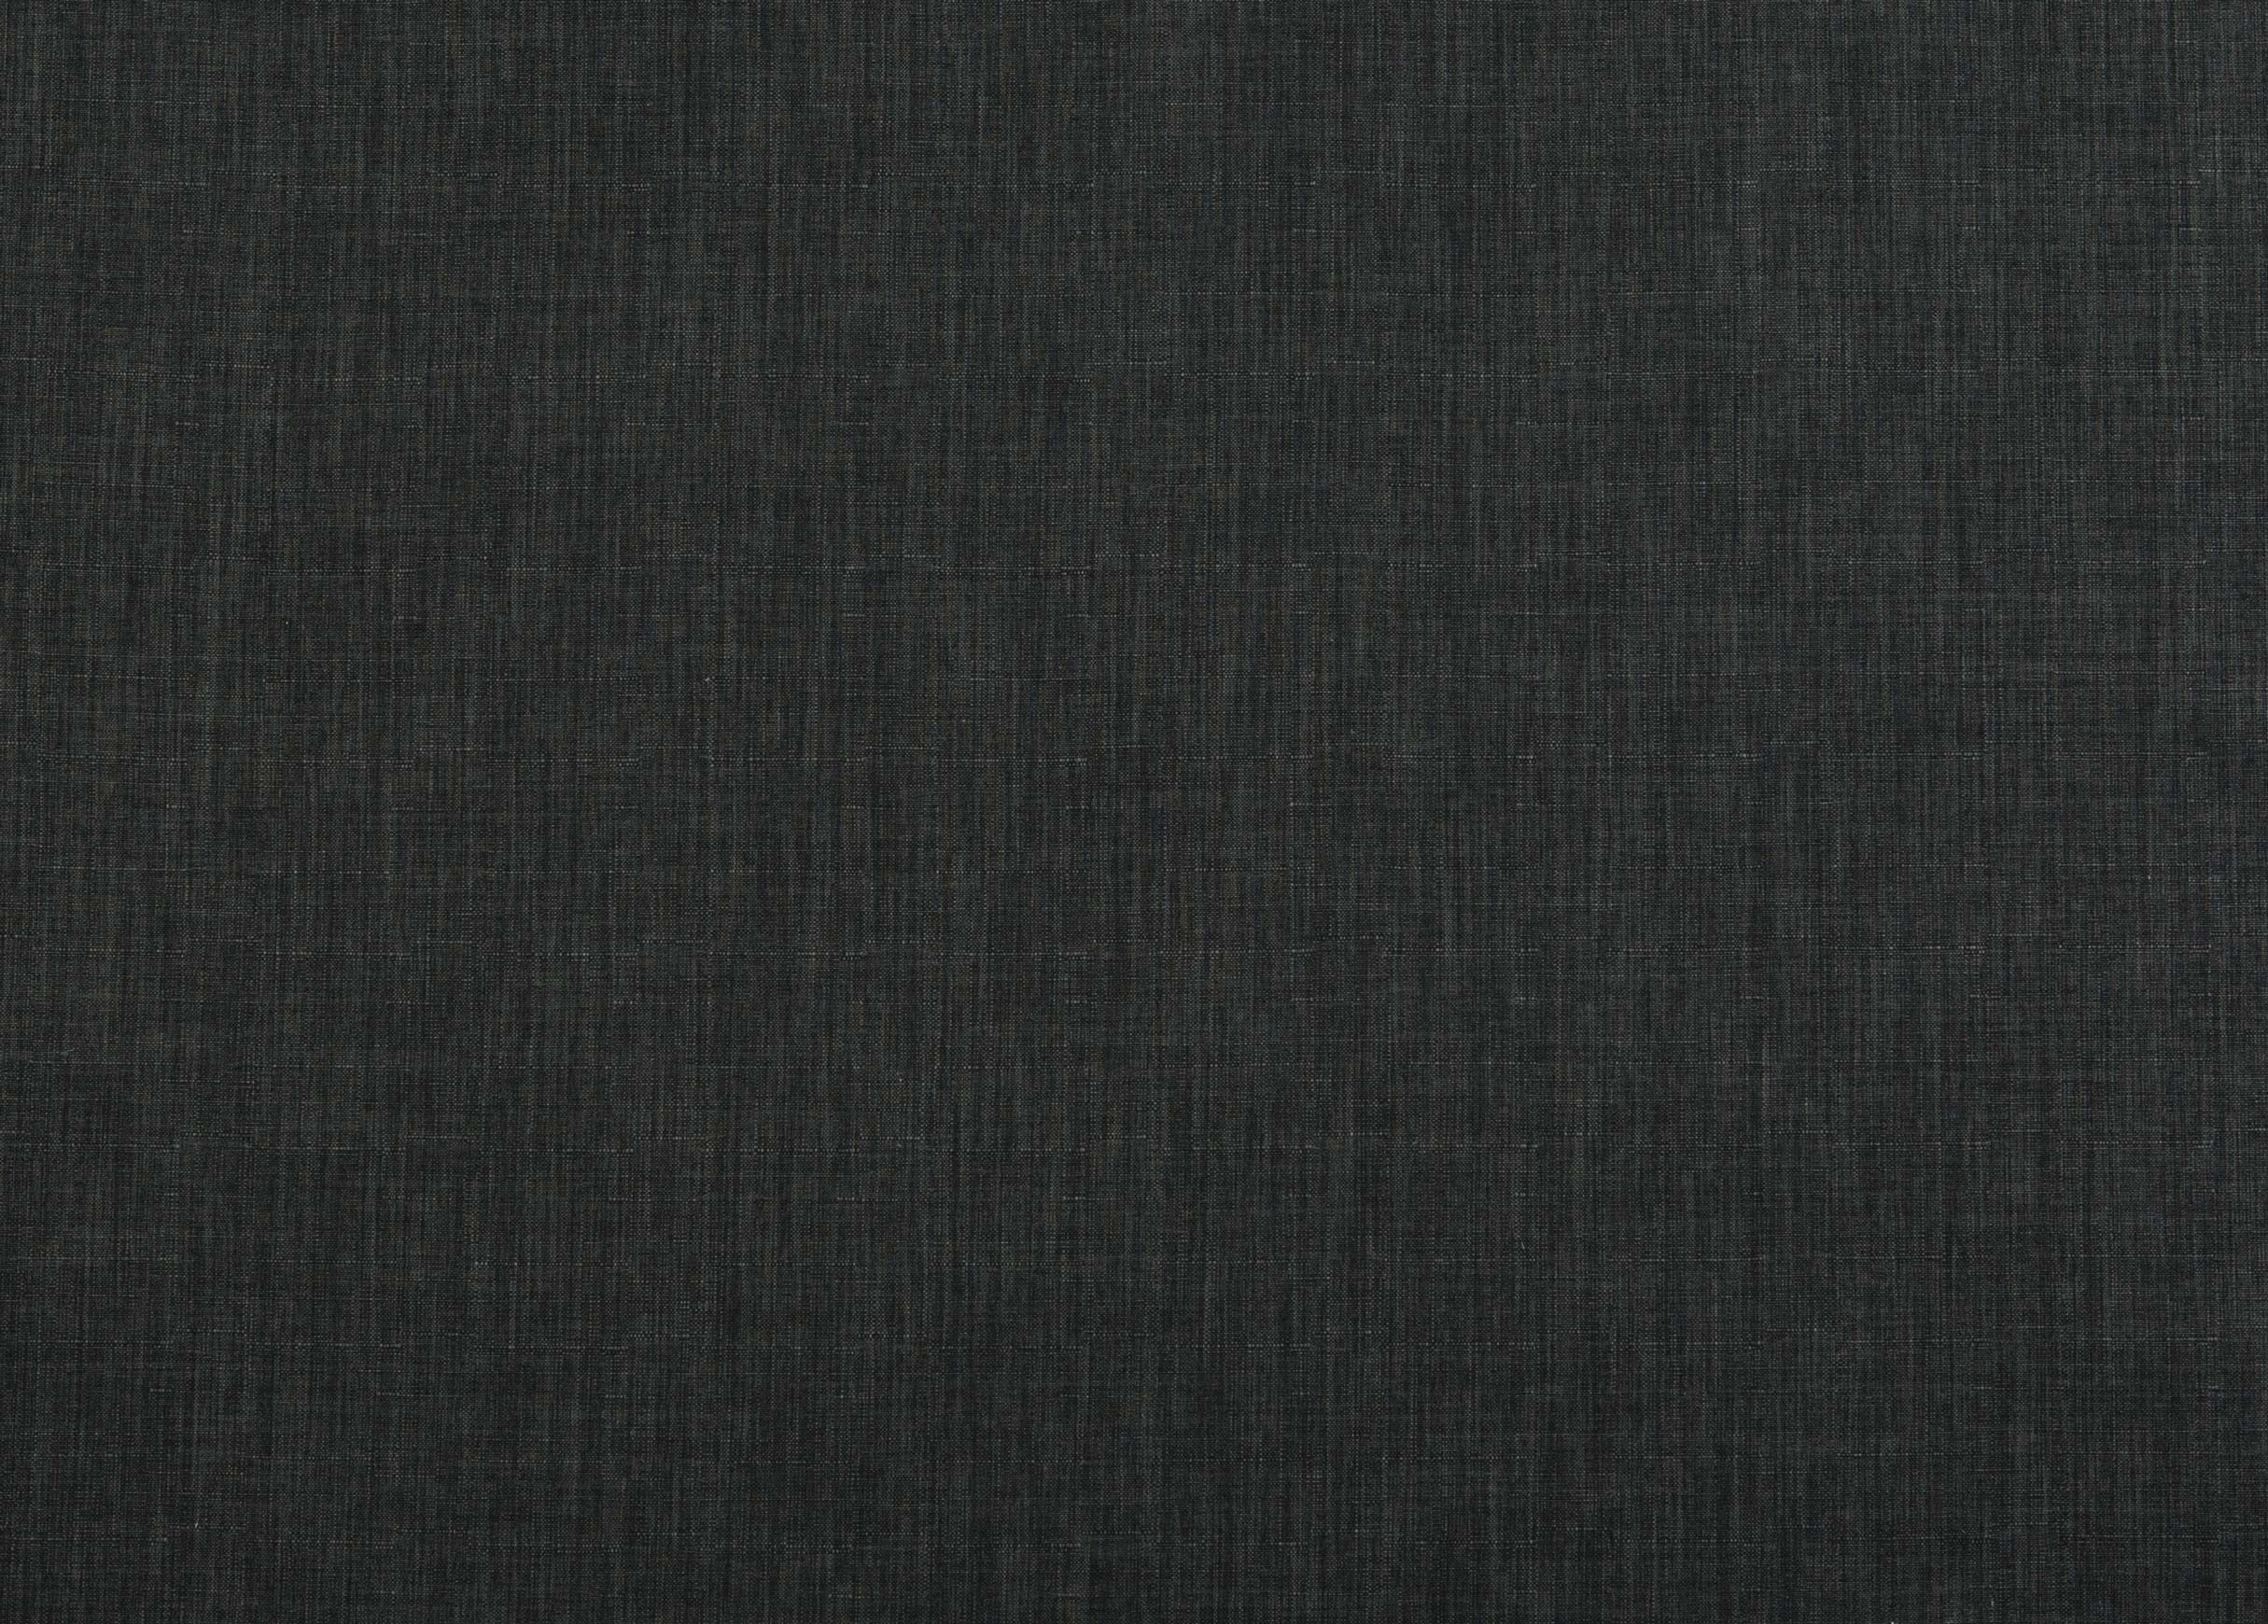 Tuckahoe Charcoal Fabric By the Yard